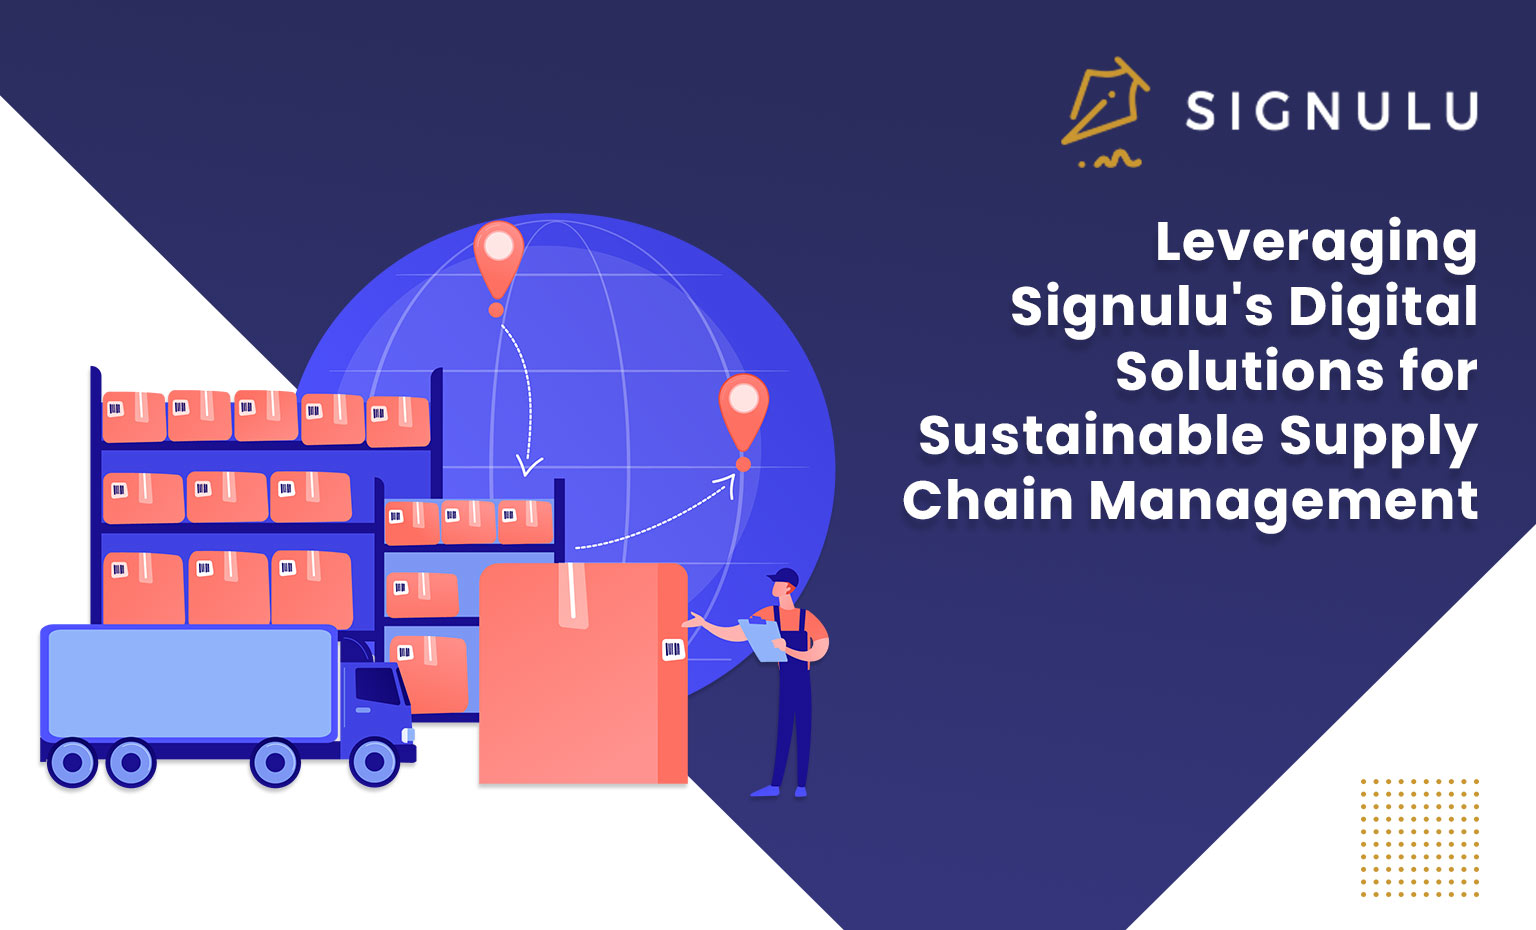 Leveraging Signulu’s Digital Solutions for Sustainable Supply Chain Management